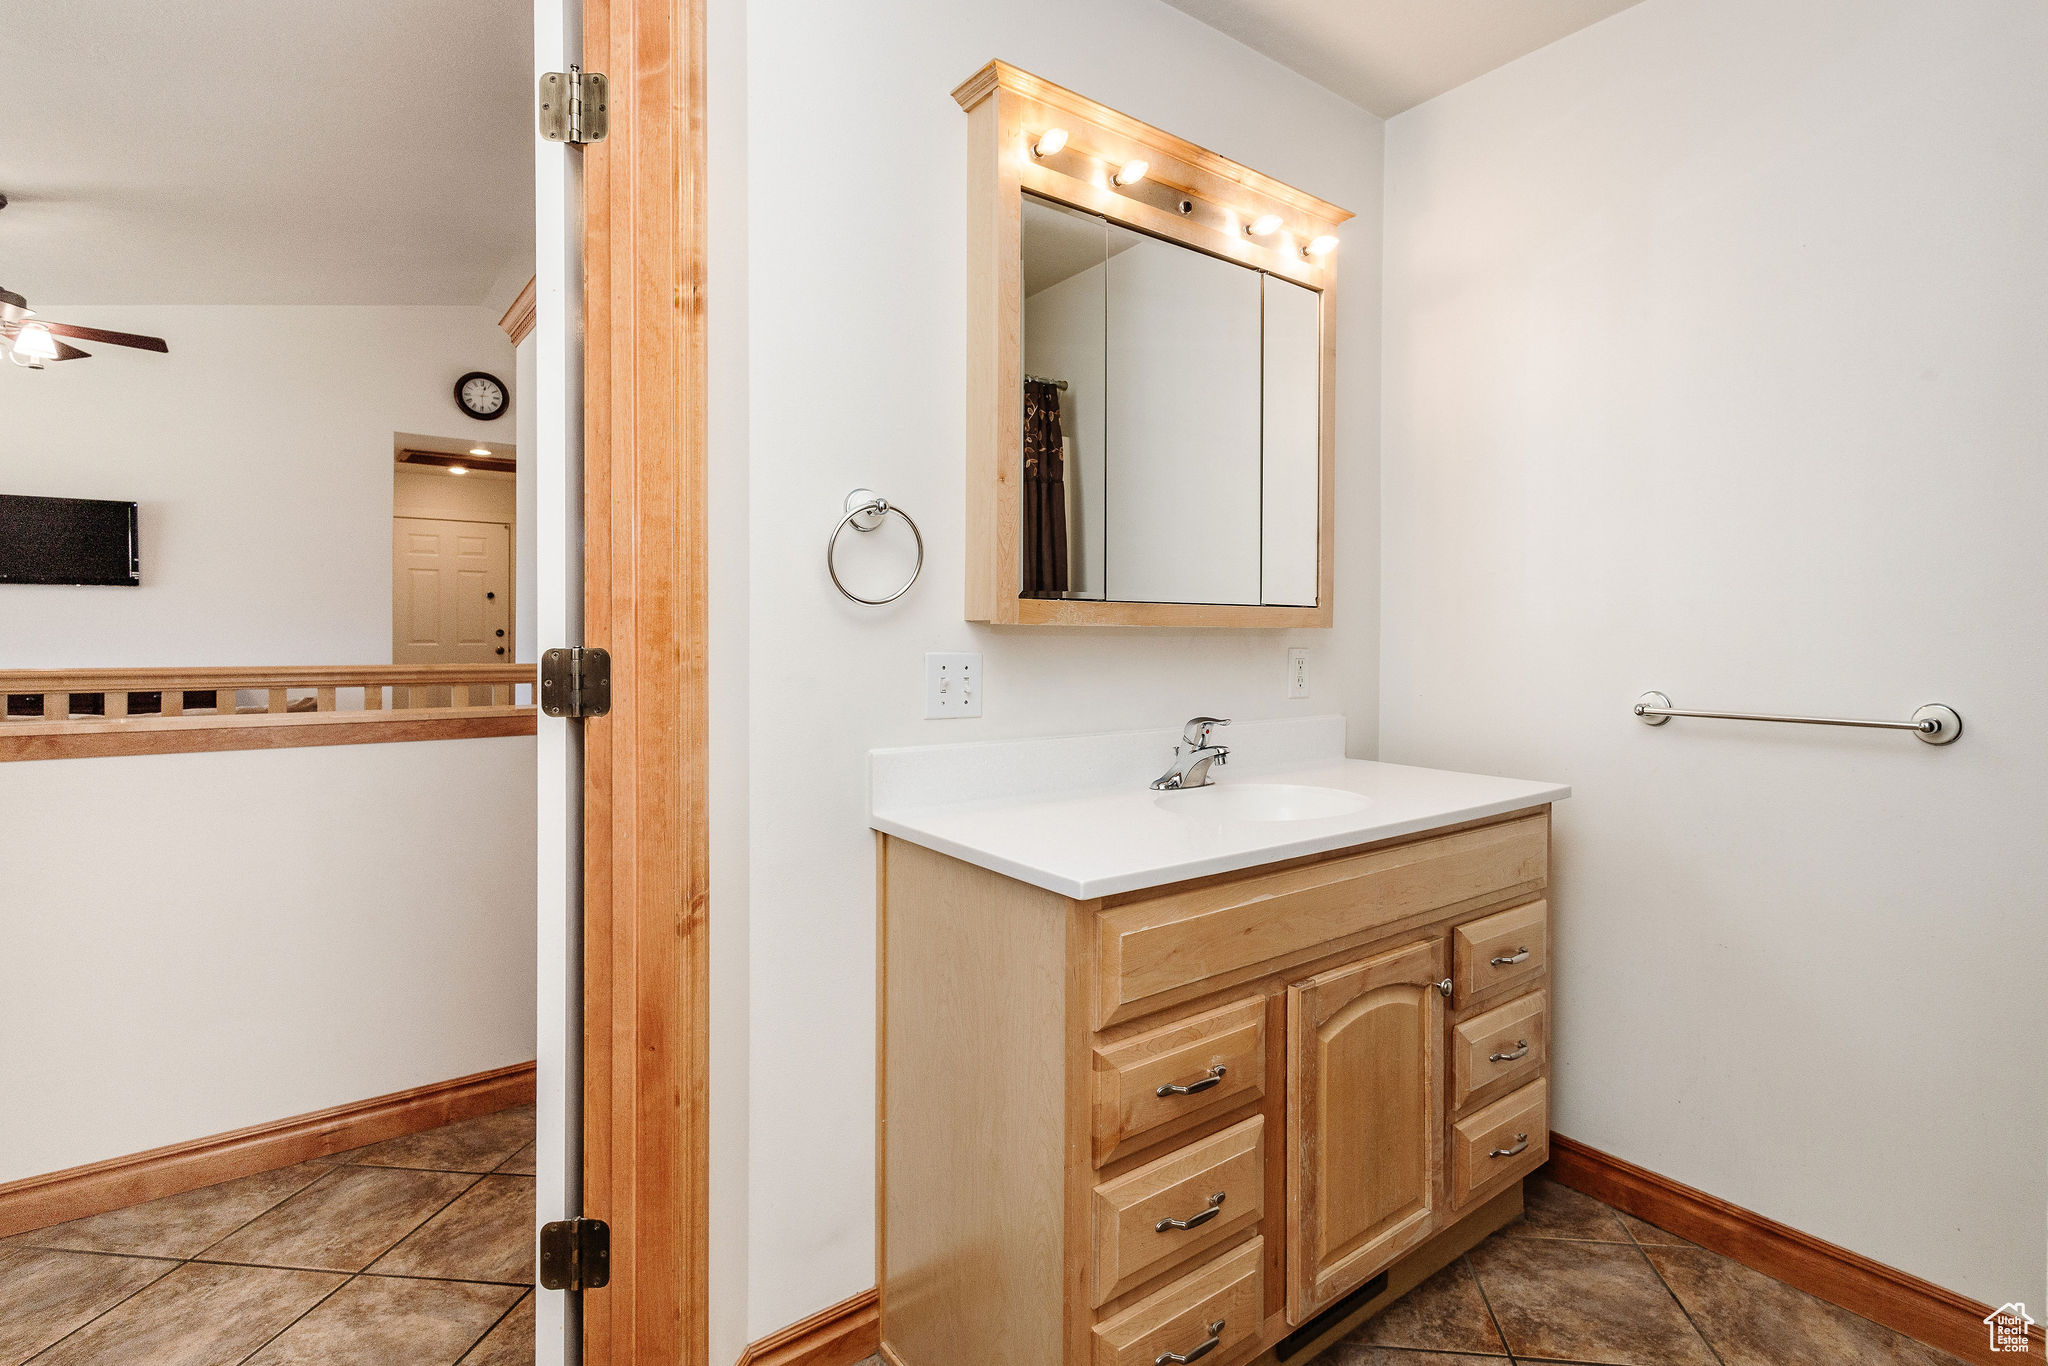 Bathroom featuring vaulted ceiling, oversized vanity, ceiling fan, and tile floors